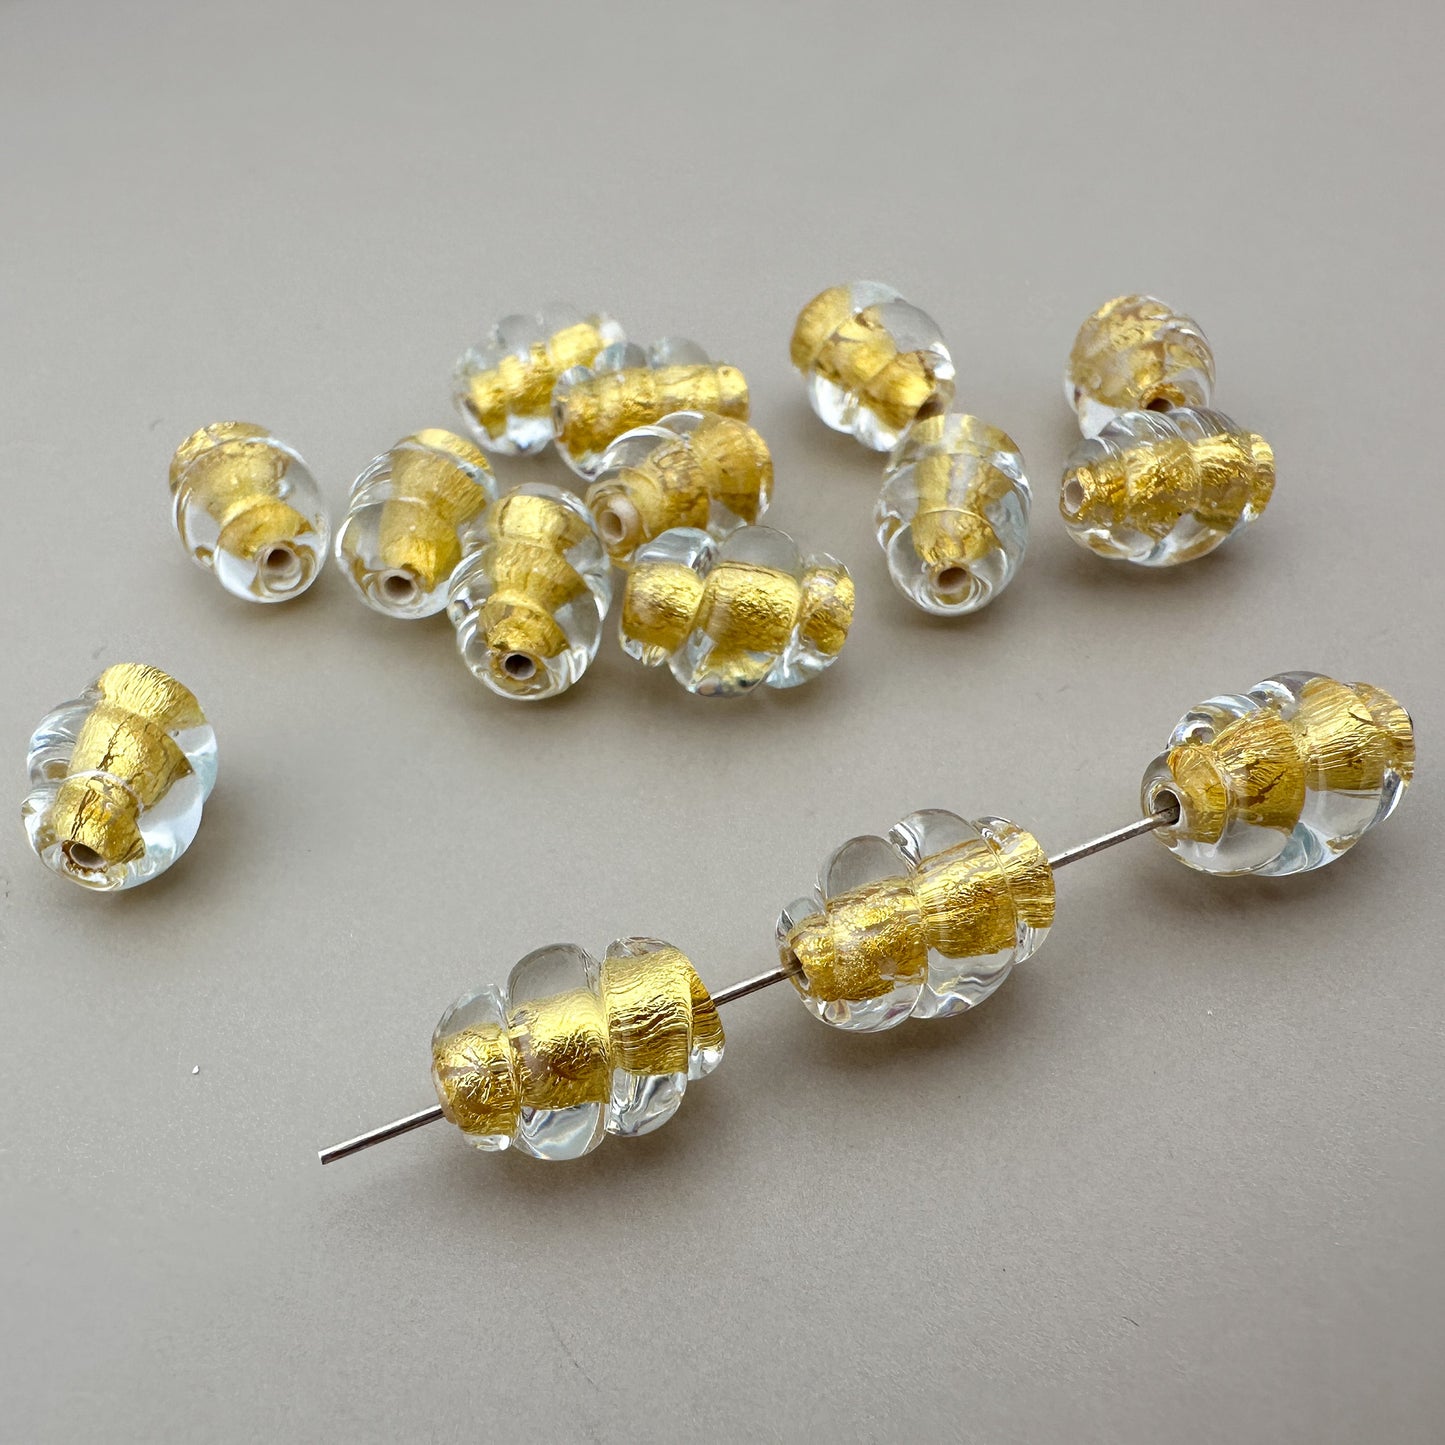 Vintage Handmade Czech Lampwork 8x12mm Clear with 24k Gold Foil Core Spiral Oval Glass Bead - 1 pc. (Z797)